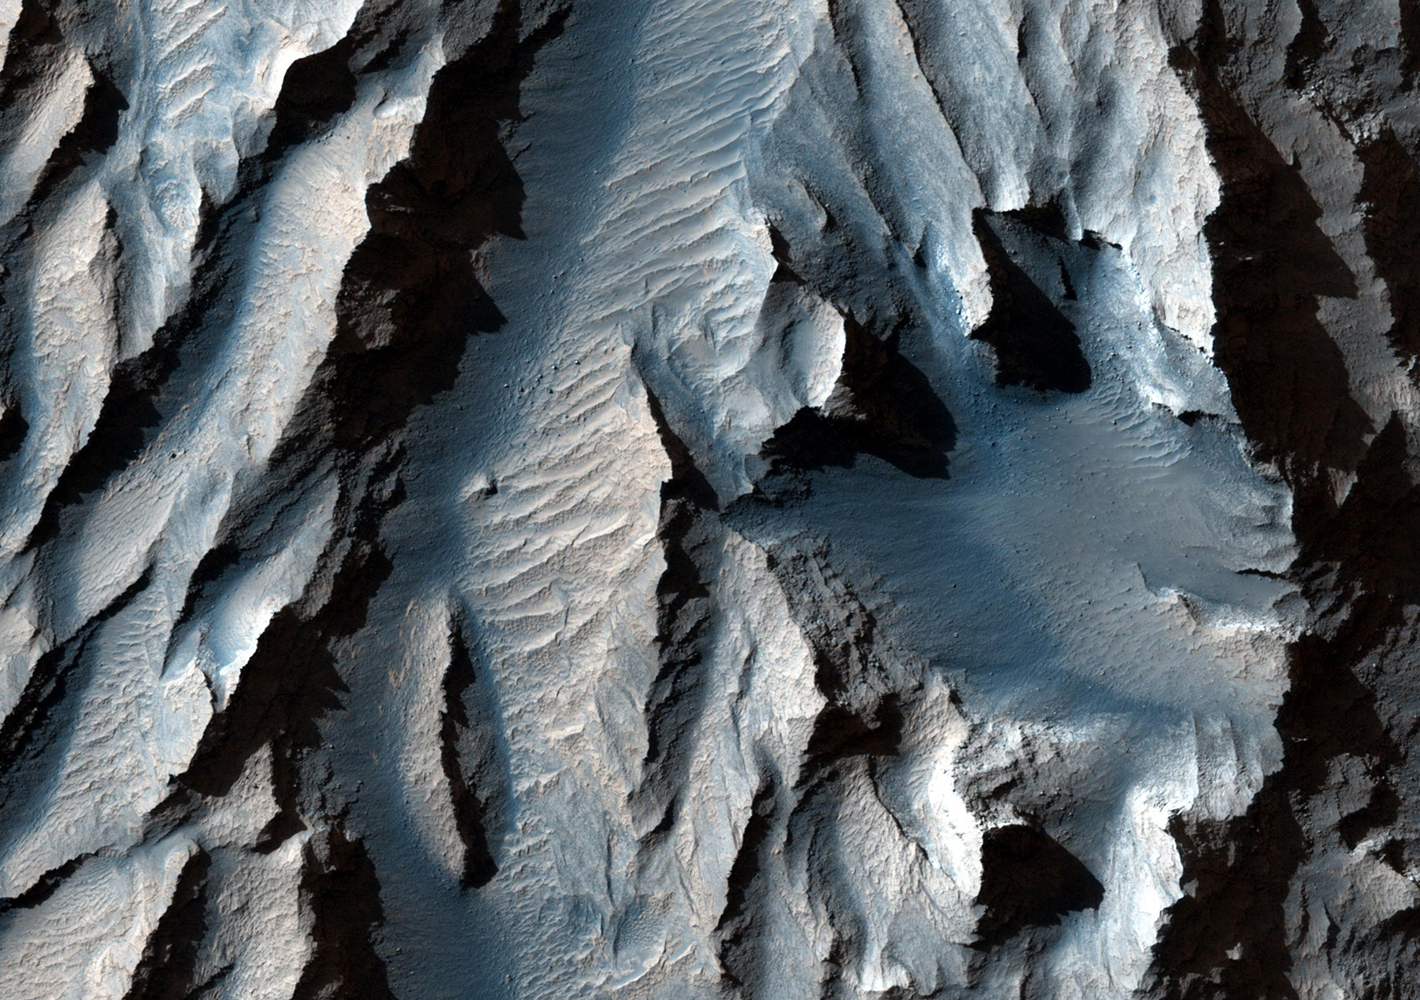 An east-facing slope in Mars's Tithonium Chasma, obtained Jan. 10, 2014, showing sediment layers of near-uniform thickness.